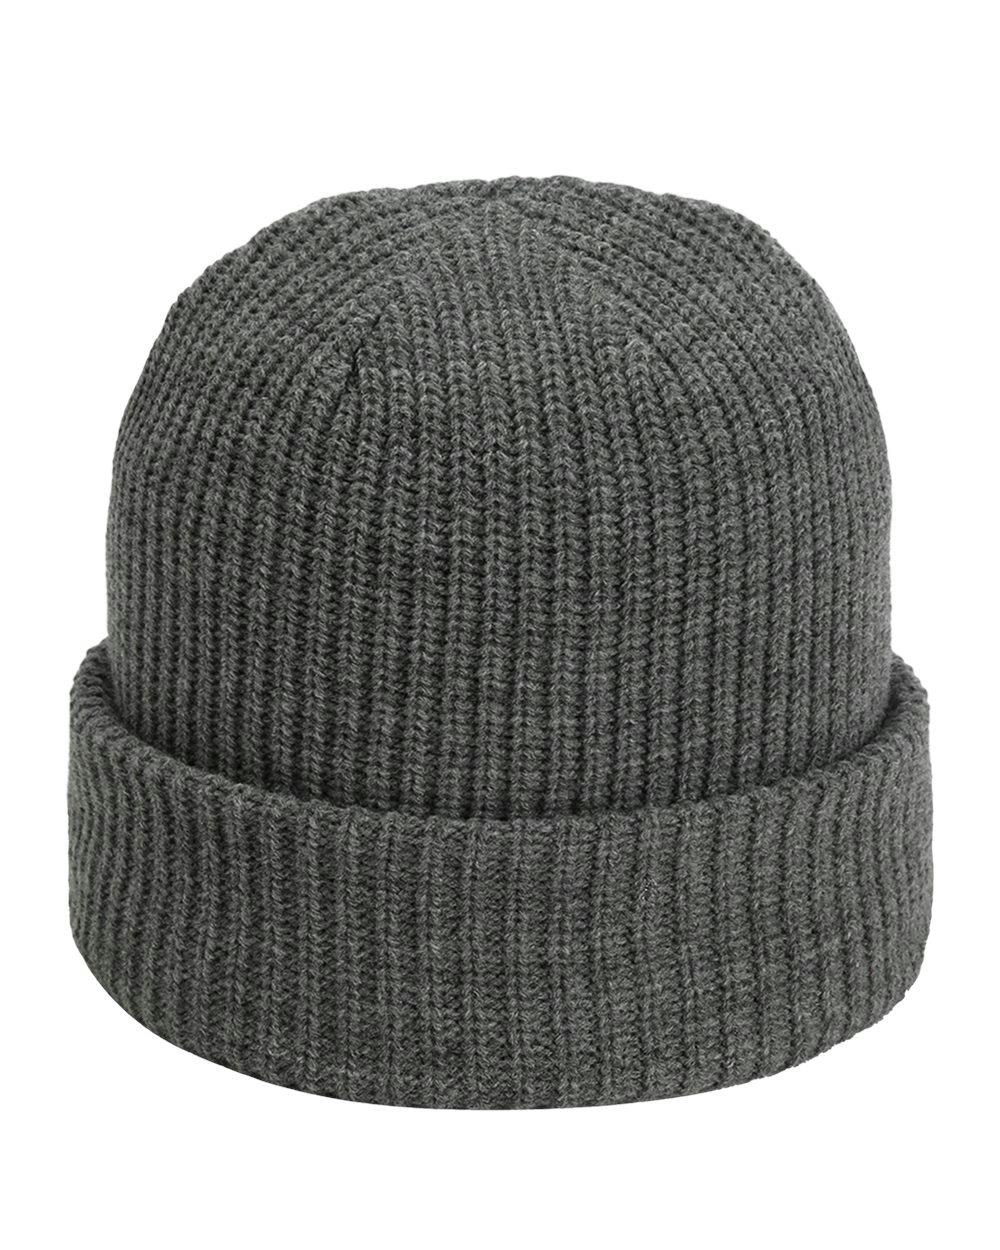 Image for The Mogul Cuffed Beanie - 6020